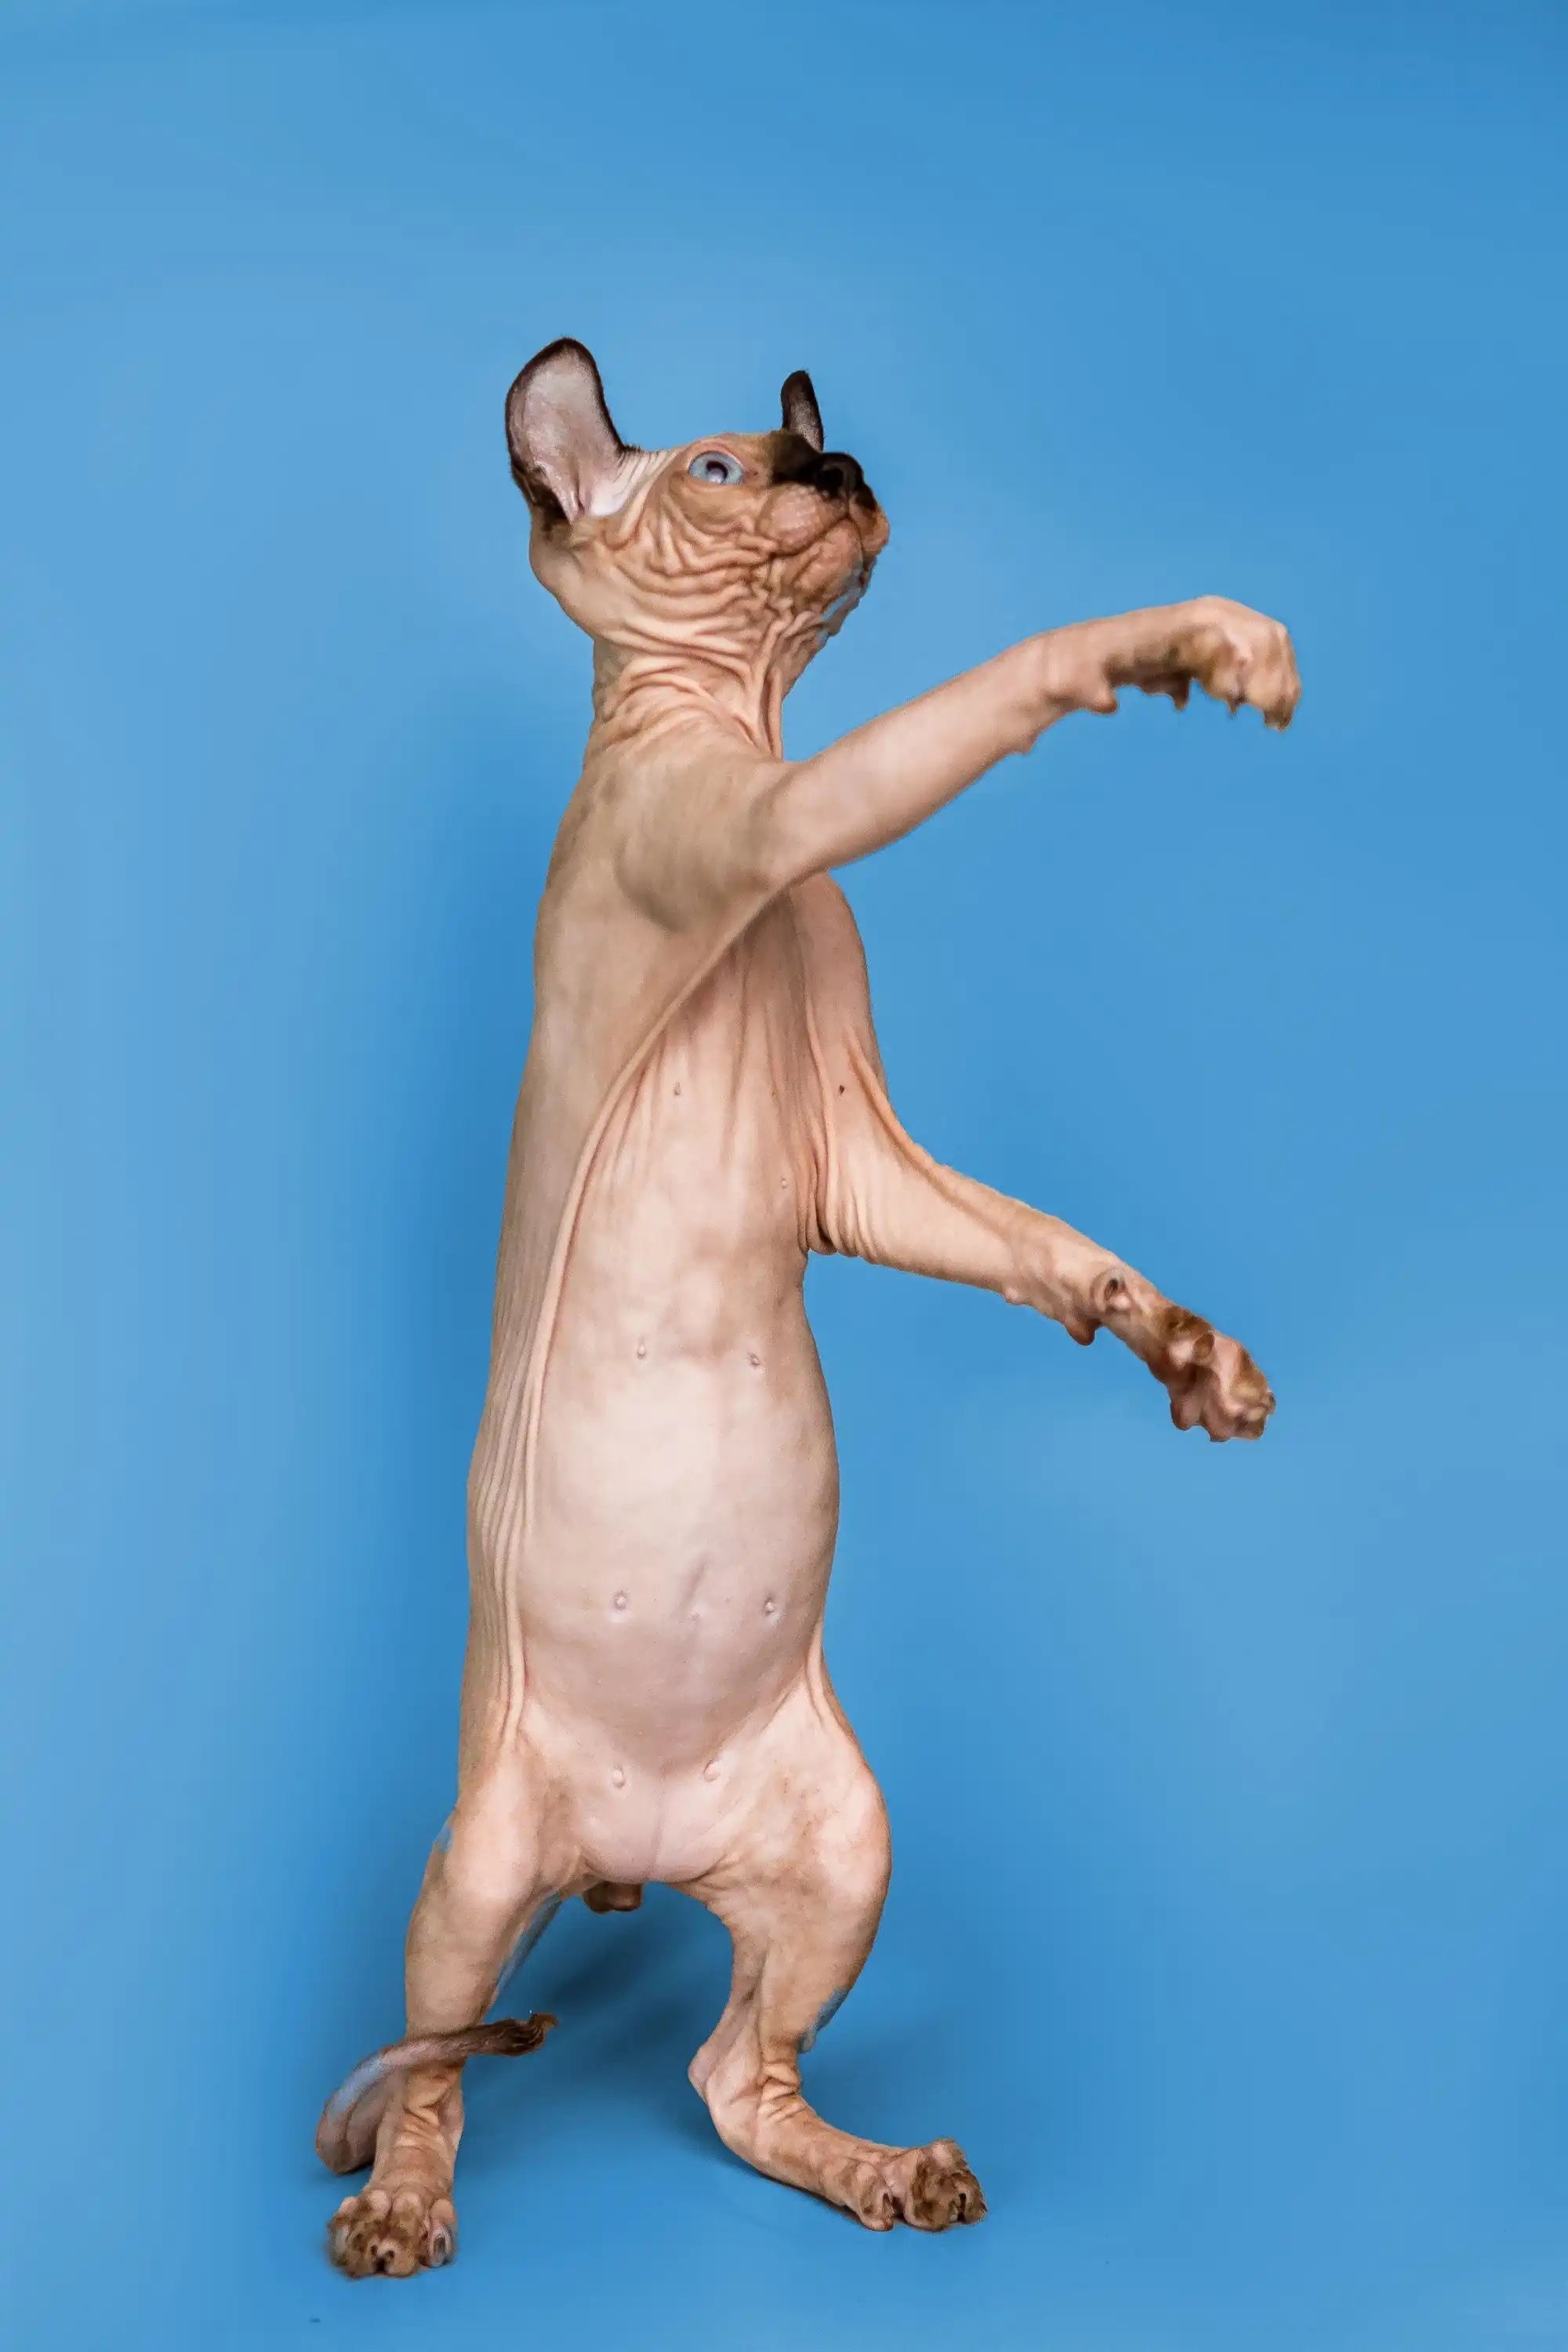 Sphynx Cats and Kittens for Sale Arnold | Elf Kitten